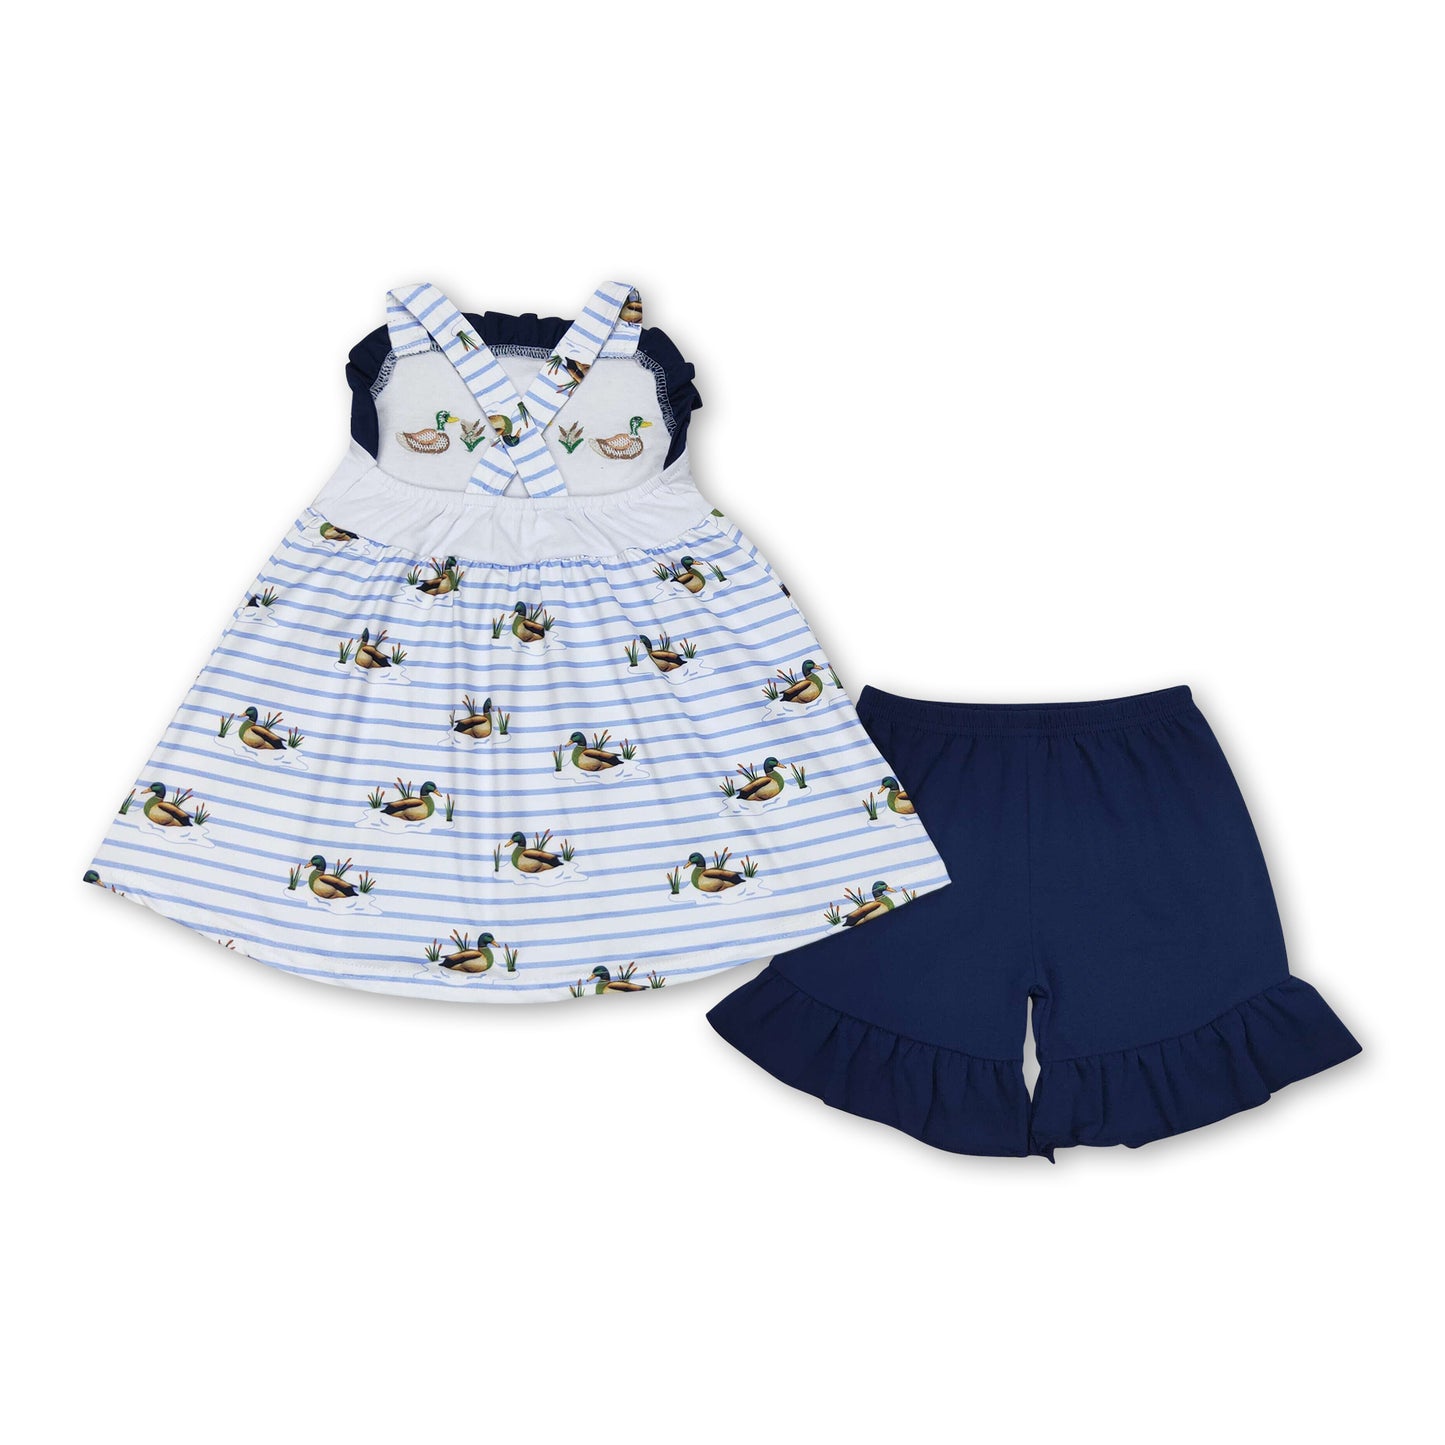 Duck stripe tunic navy shorts girls summer outfits